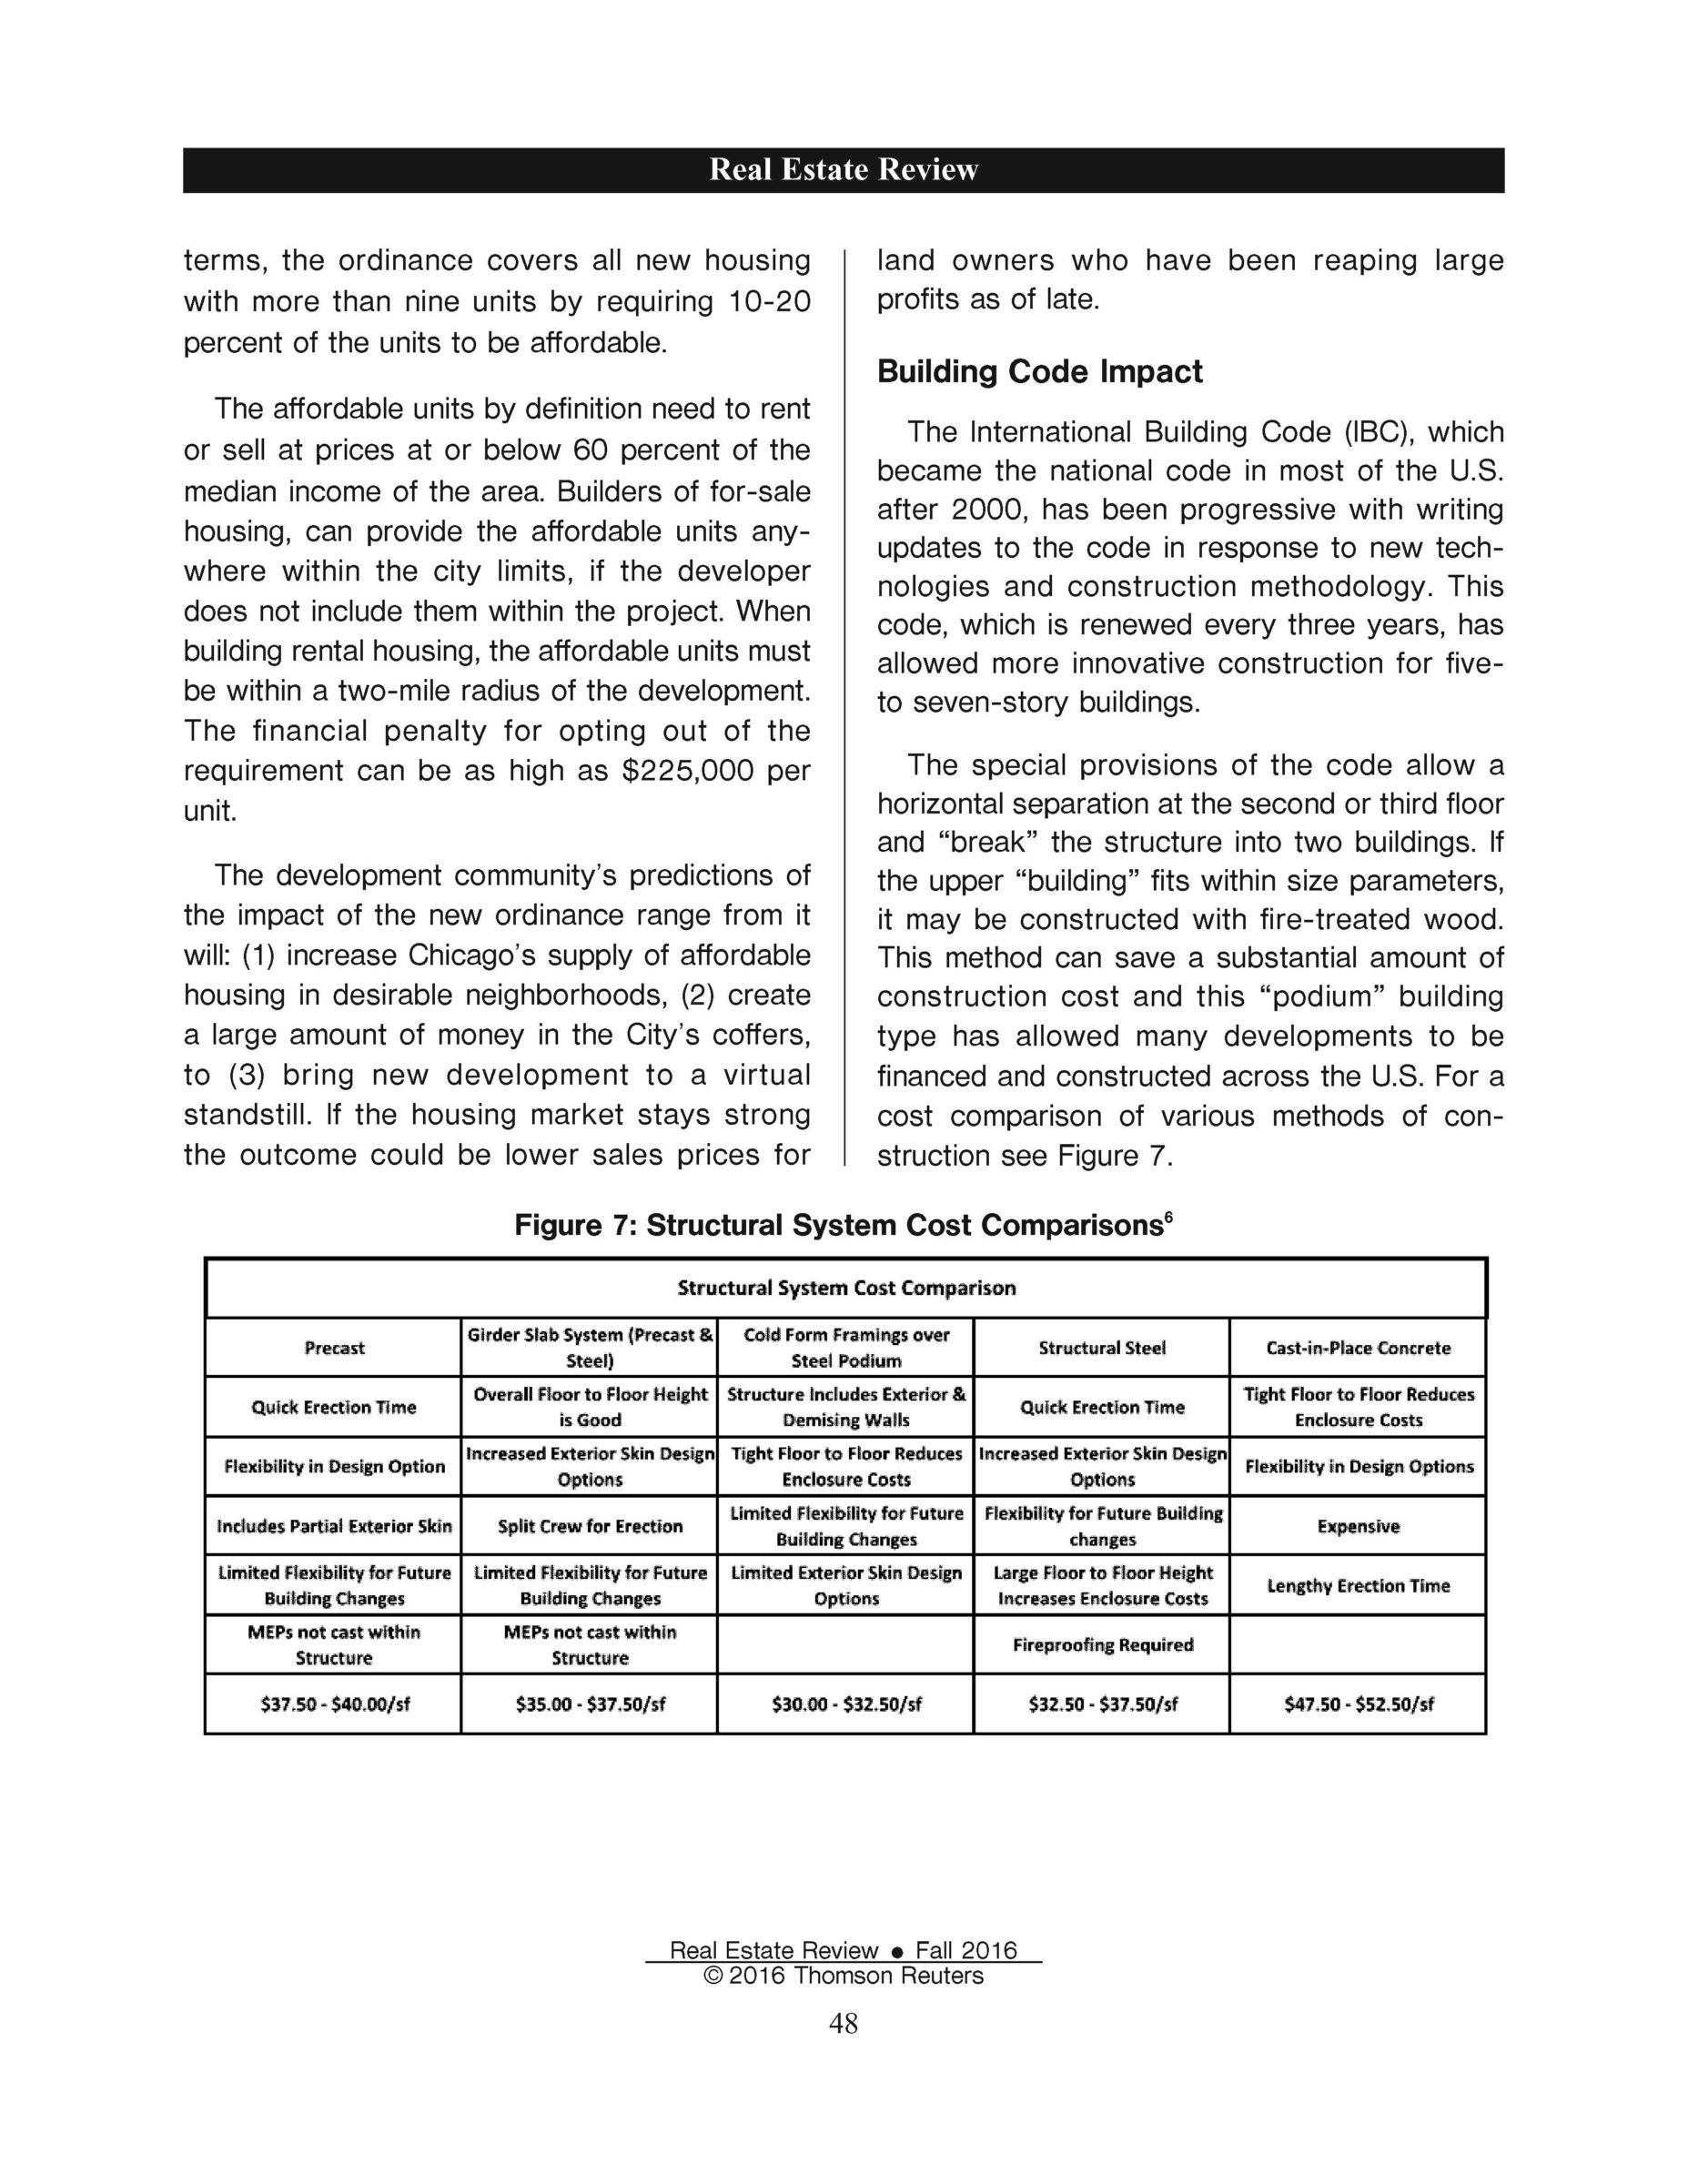 Real Estate Review (Building Mixed-Use Developments Process and Progress in Urban Design) 0916_Page_14